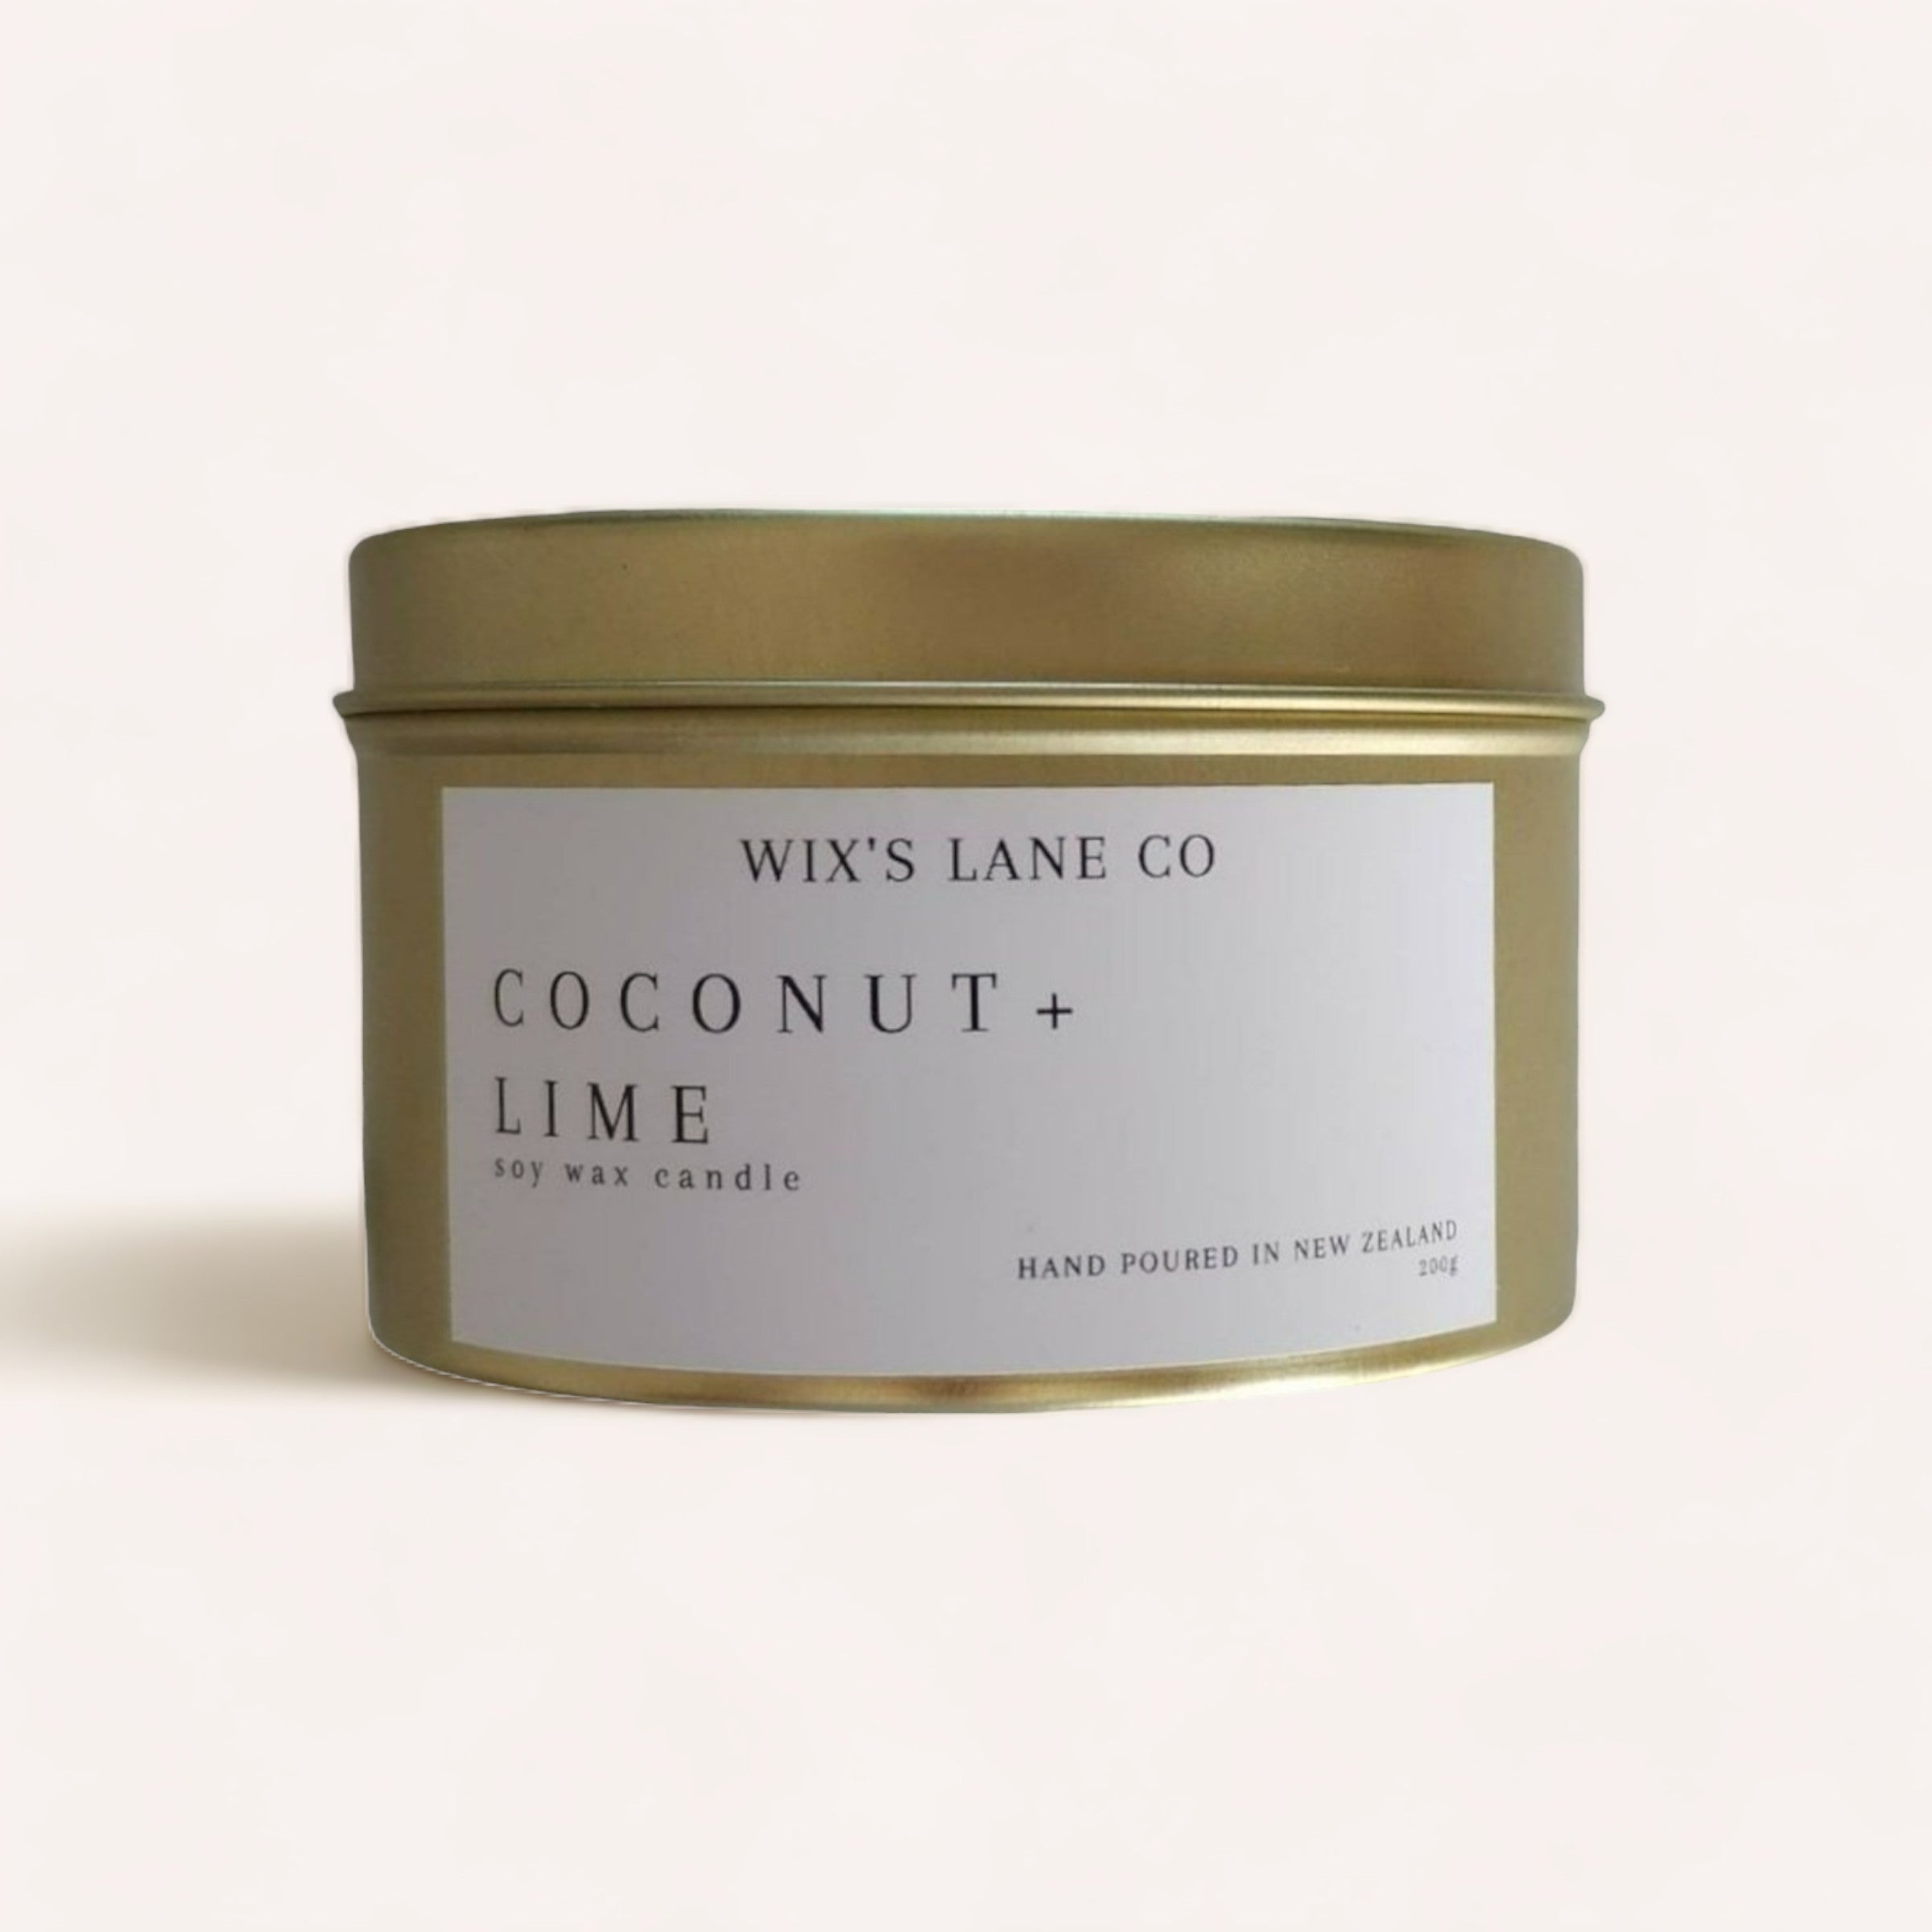 Simple and elegant Coconut + Lime Candle by Wix's Lane Co., hand-poured in New Zealand, presented in a sleek metal tin.